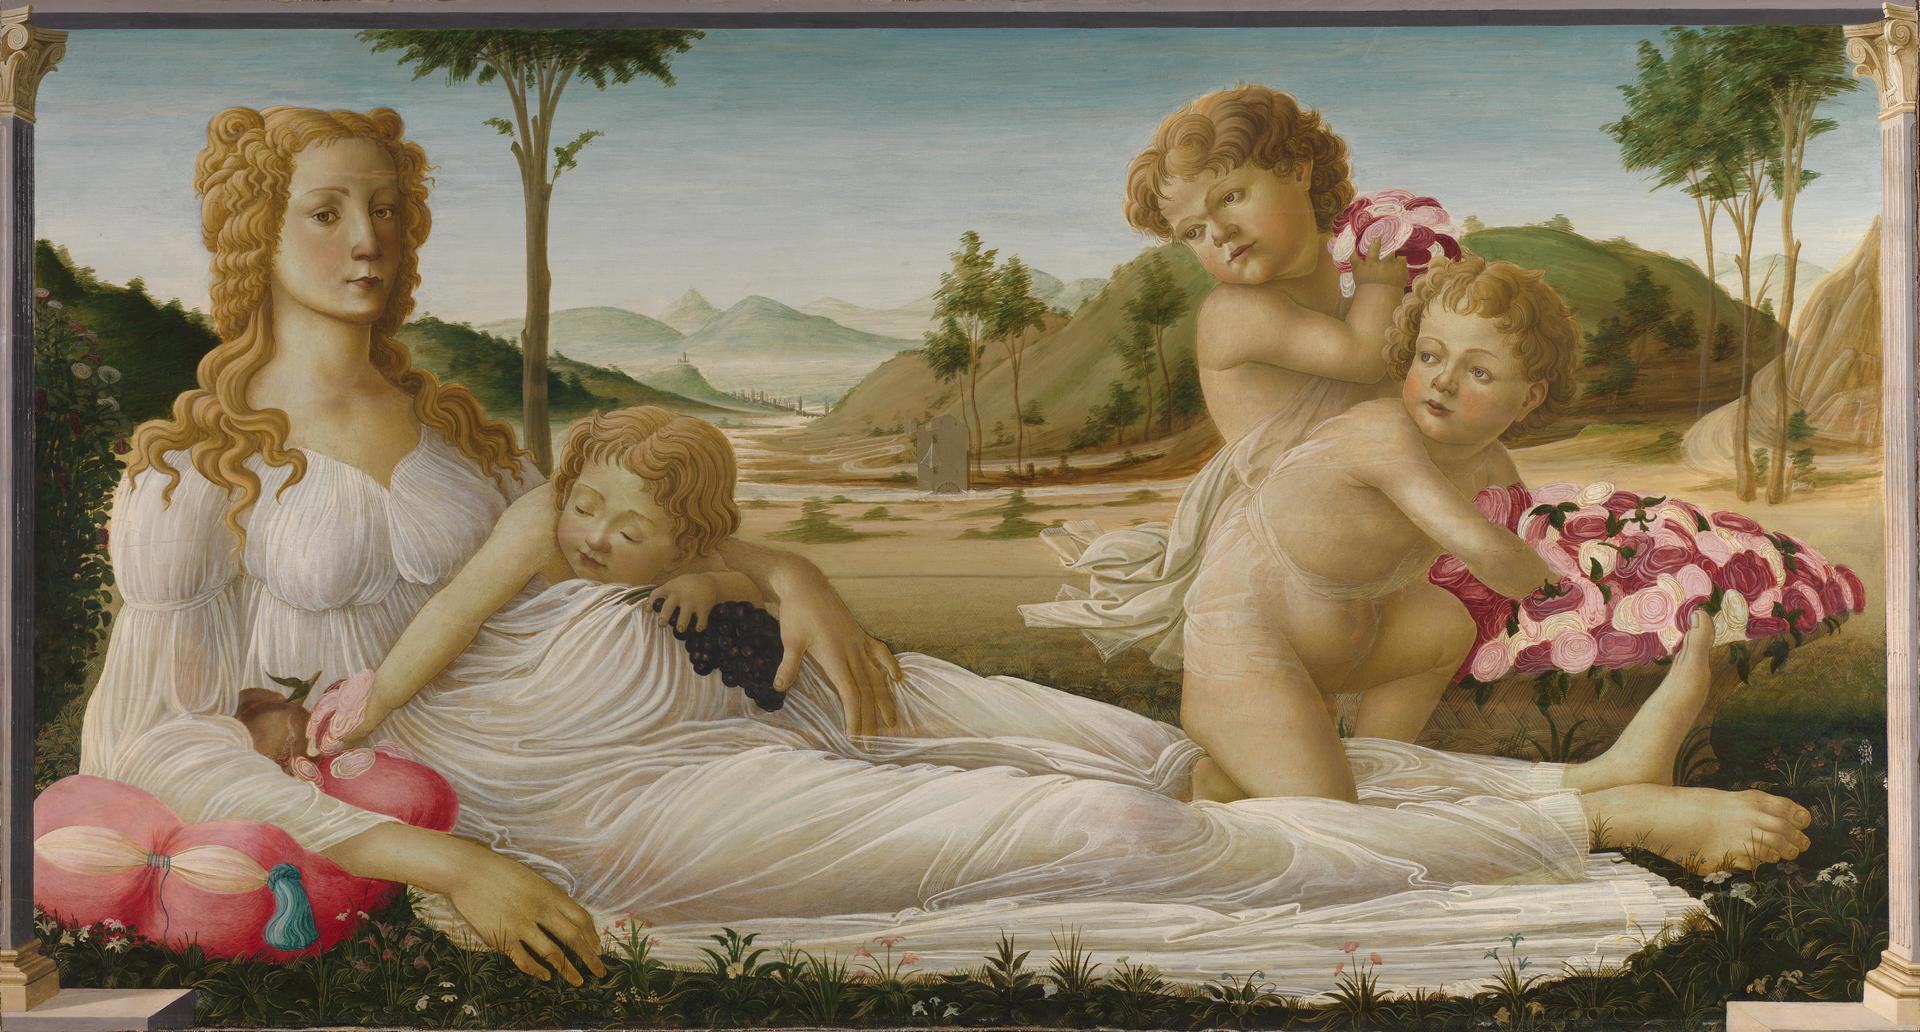 An Allegory by Italian, Florentine